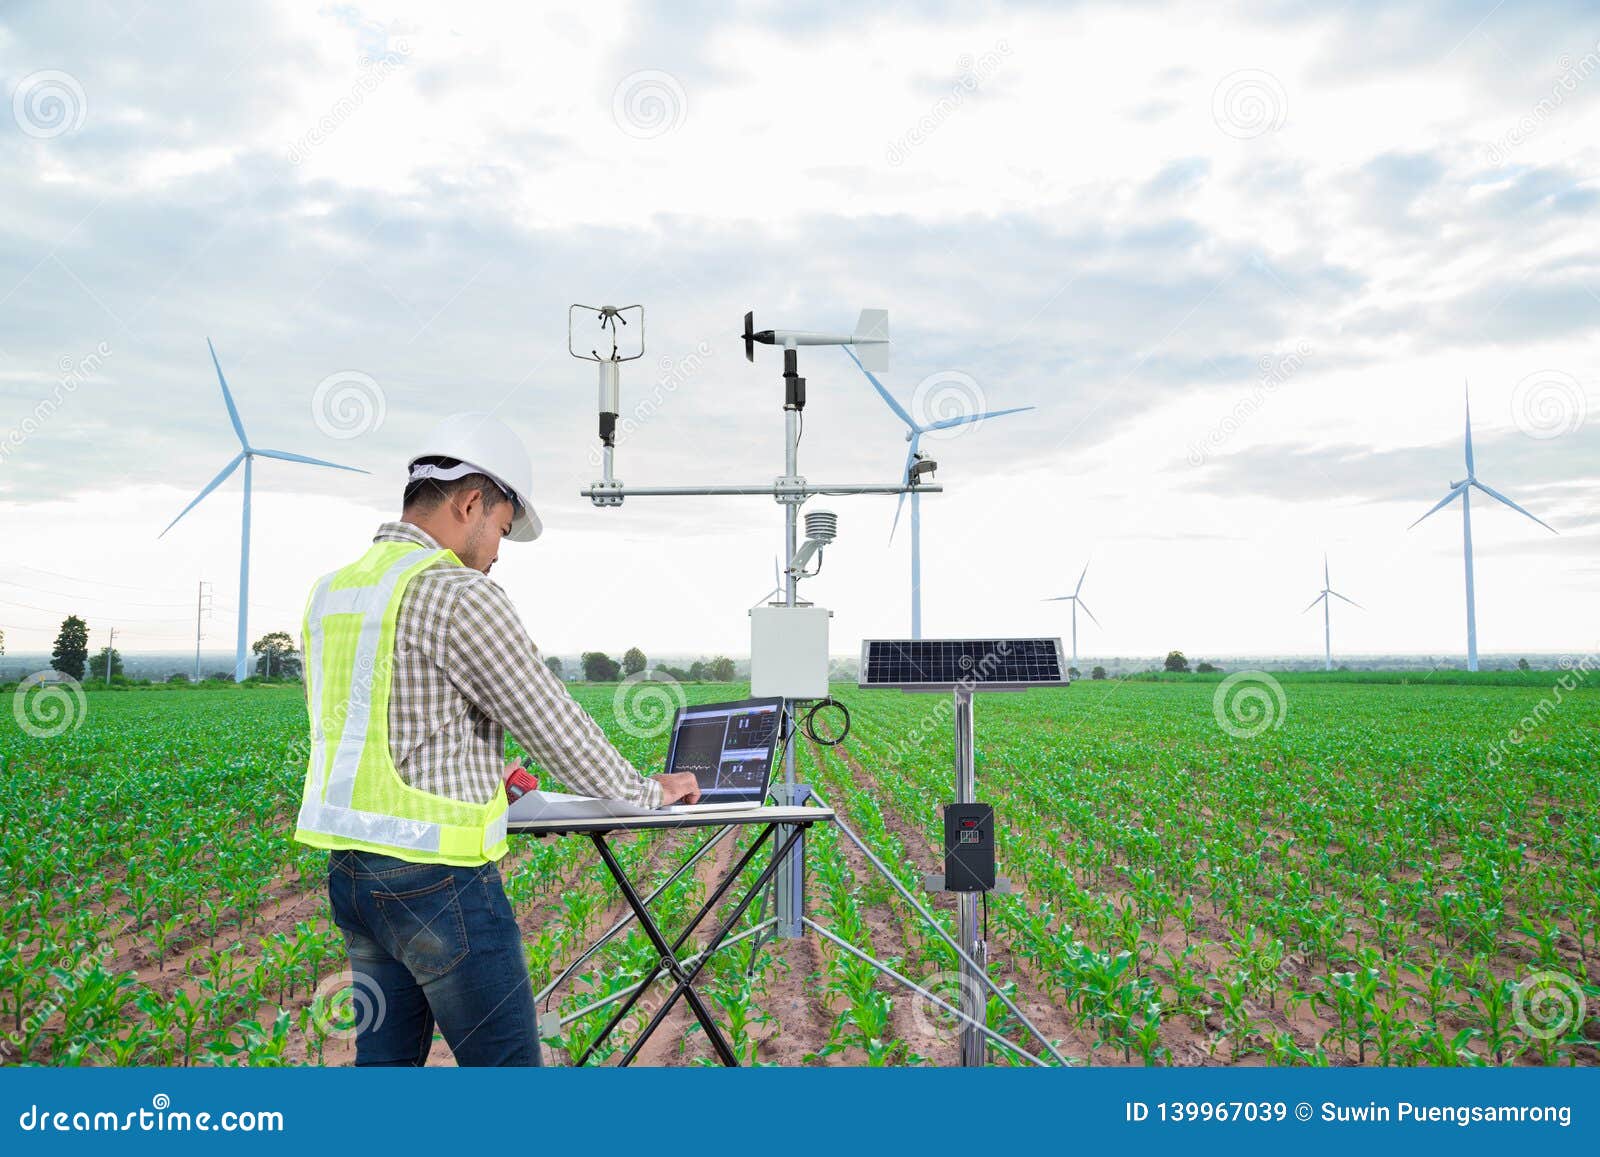 engineer using tablet computer collect data with meteorological instrument to measure the wind speed, temperature and humidity and